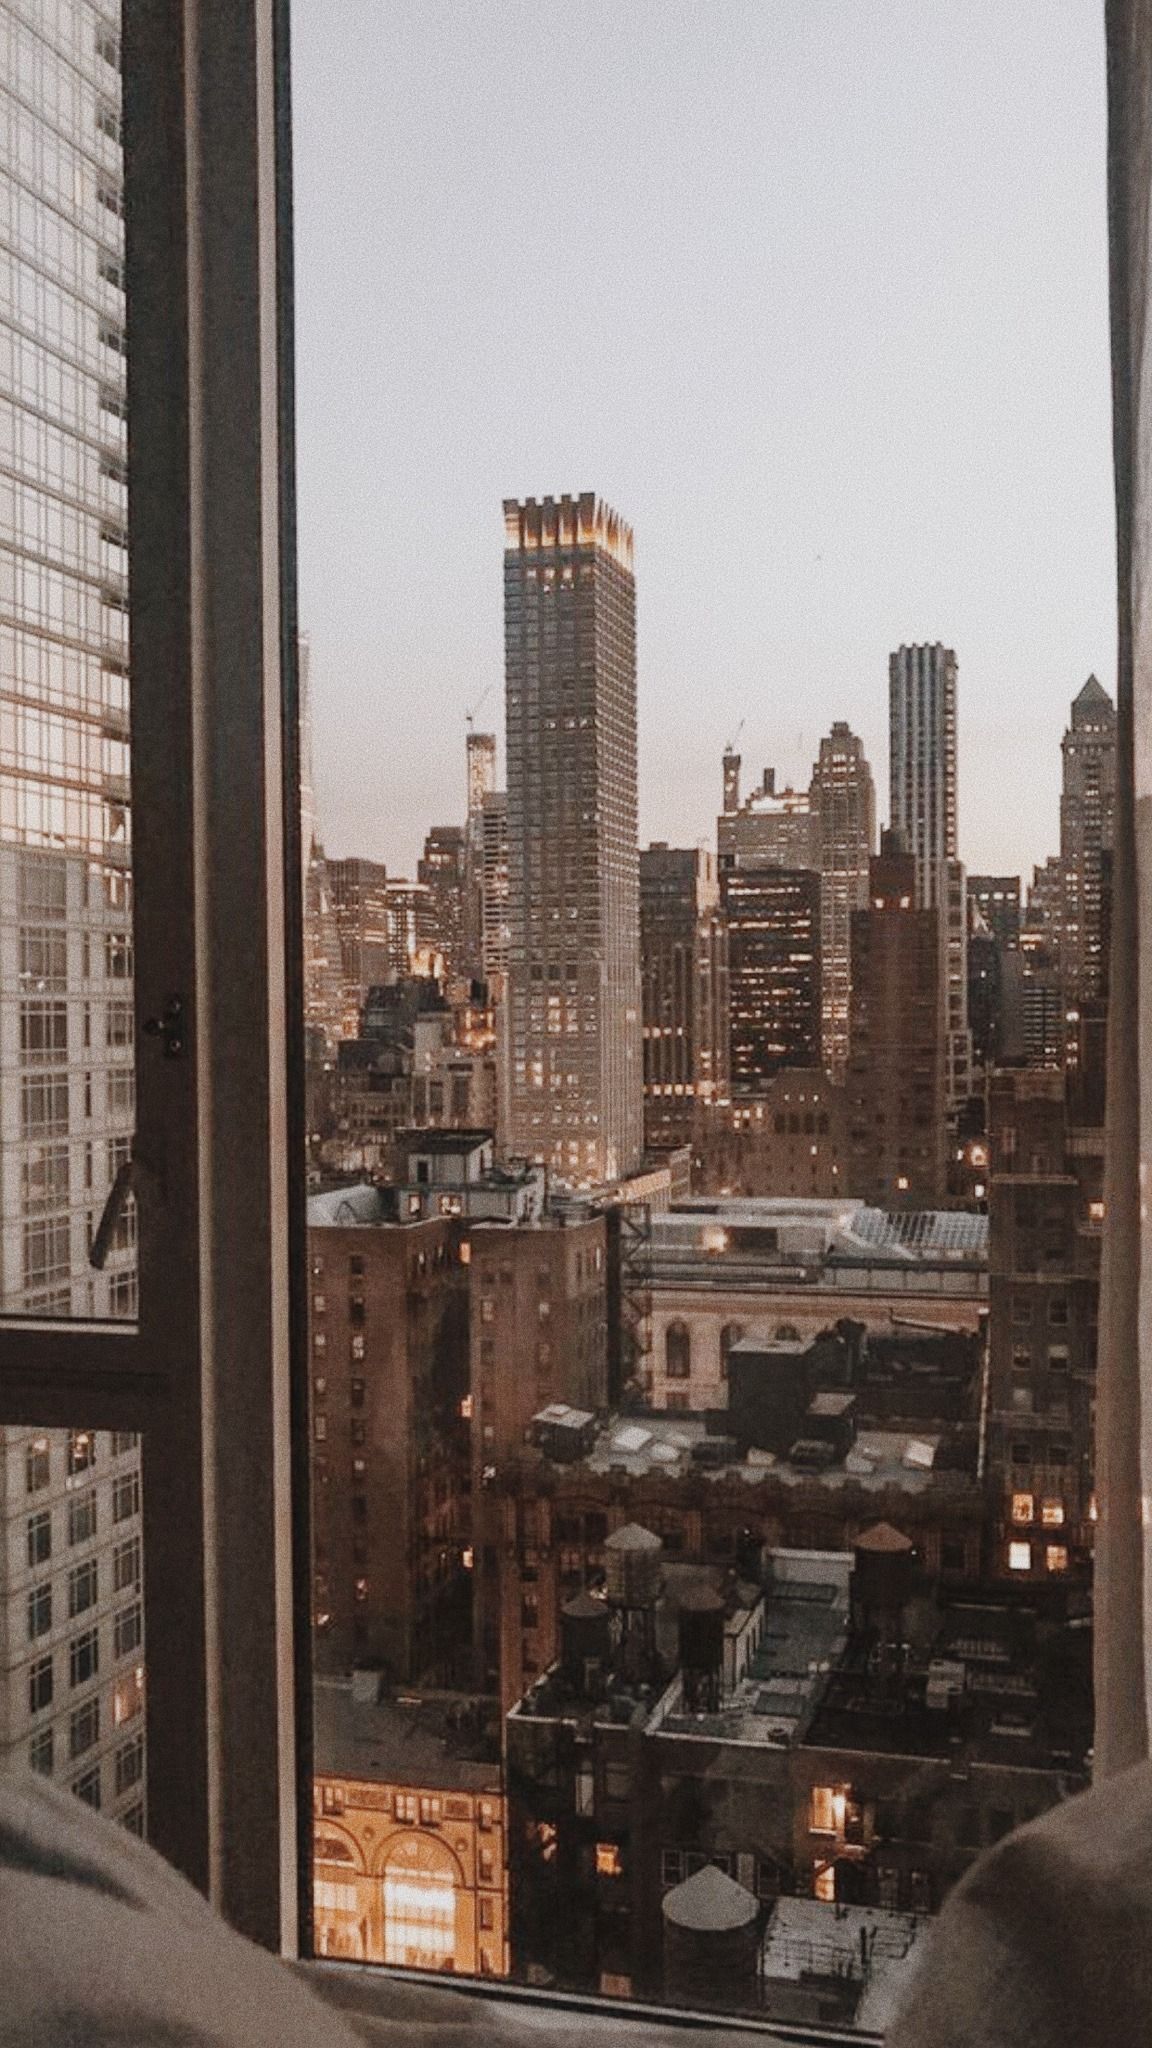 A view of the city from a window - New York